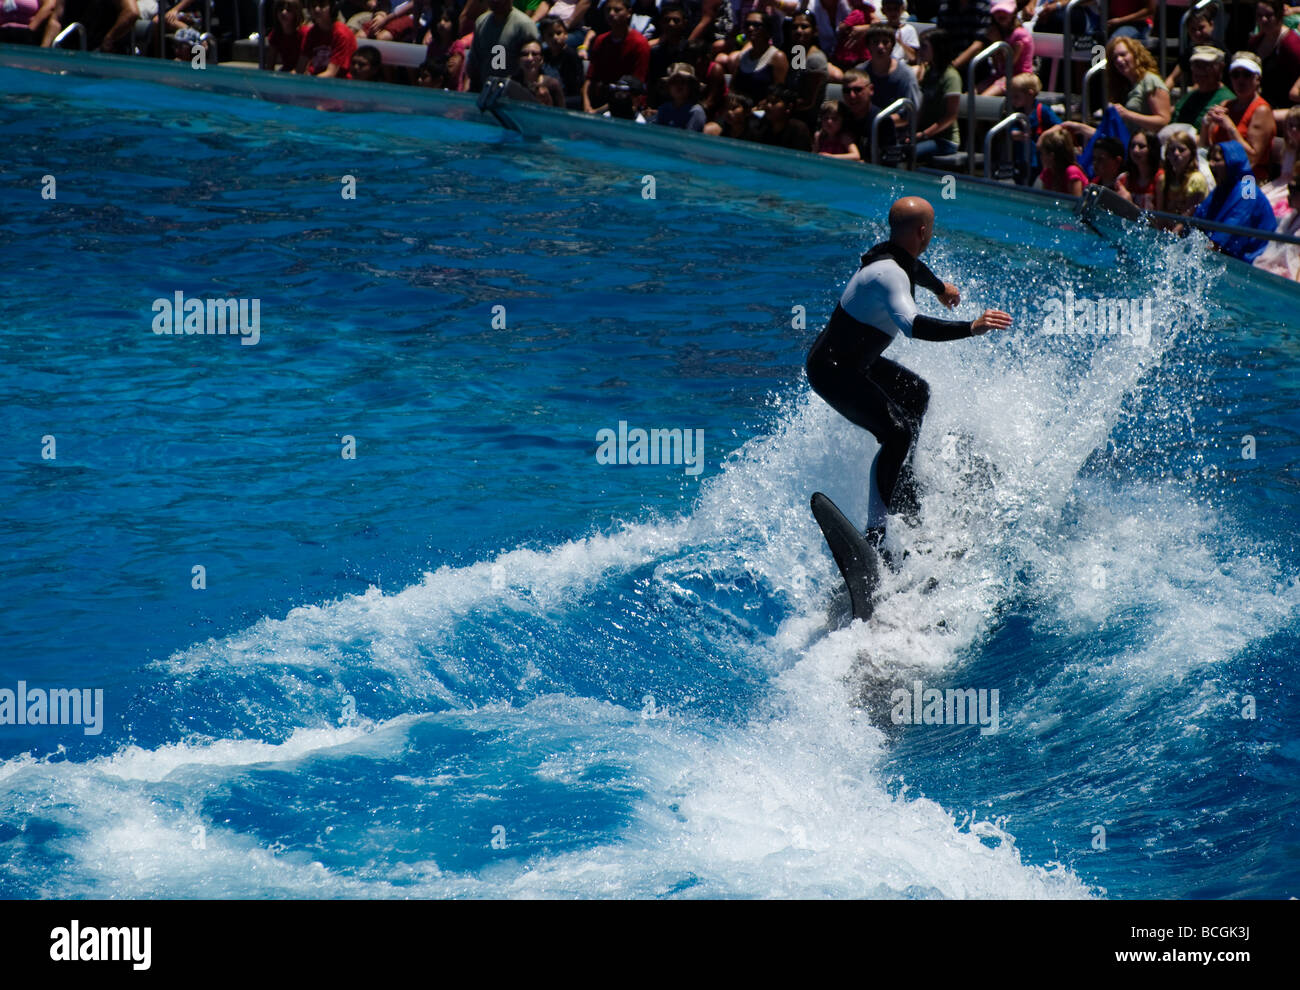 Trainer riding, surf style, on the back of an orca at Sea World, San Diego. Stock Photo